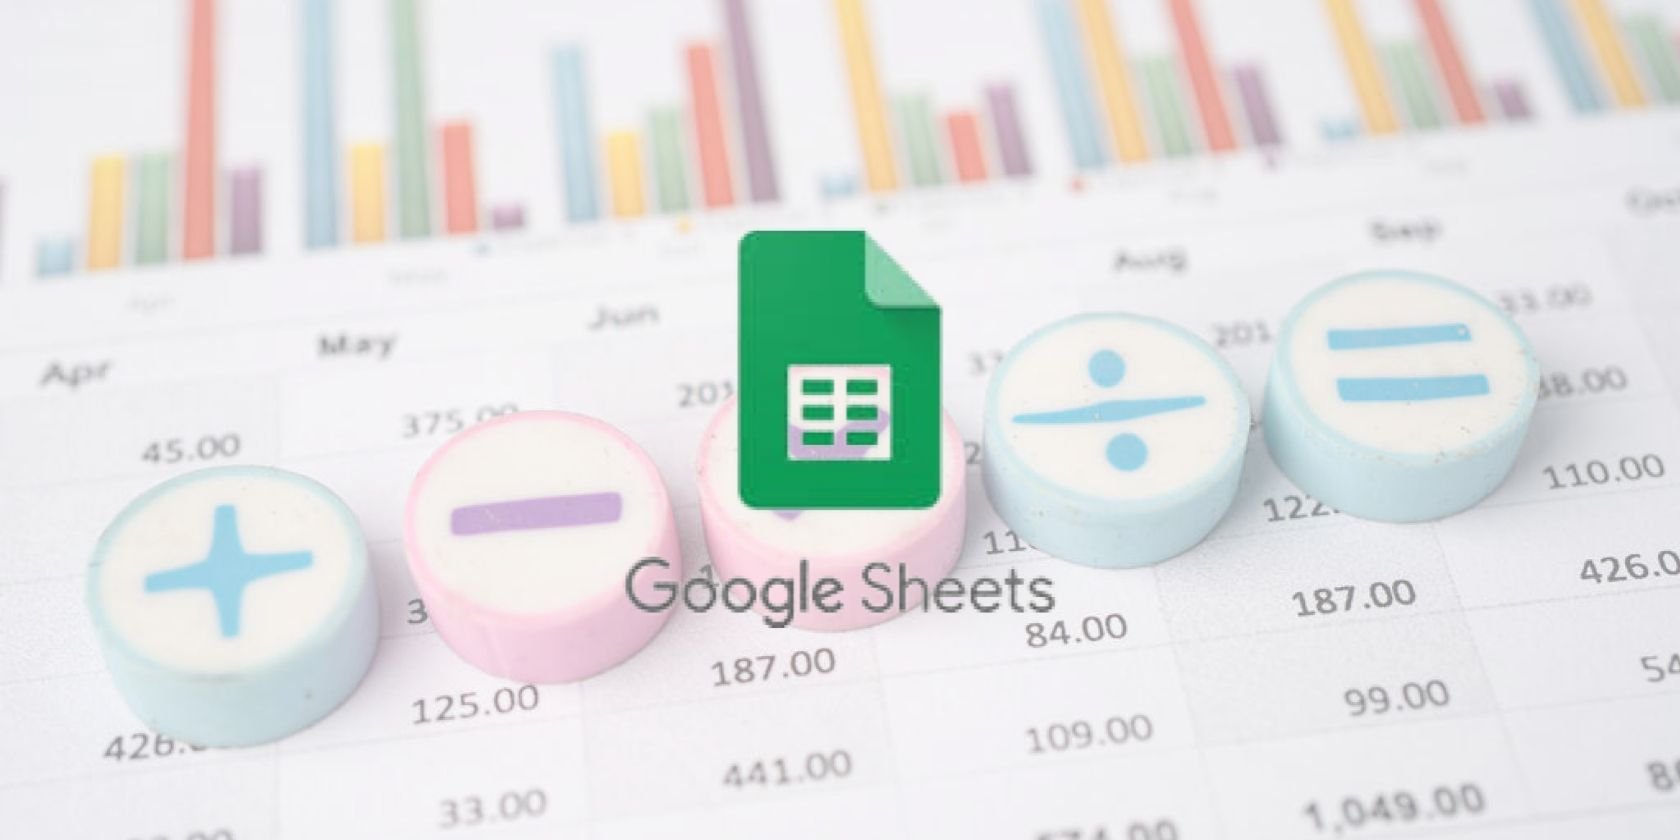 The 10 Best Google Sheets Quick Hacks You Probably Didn't Know